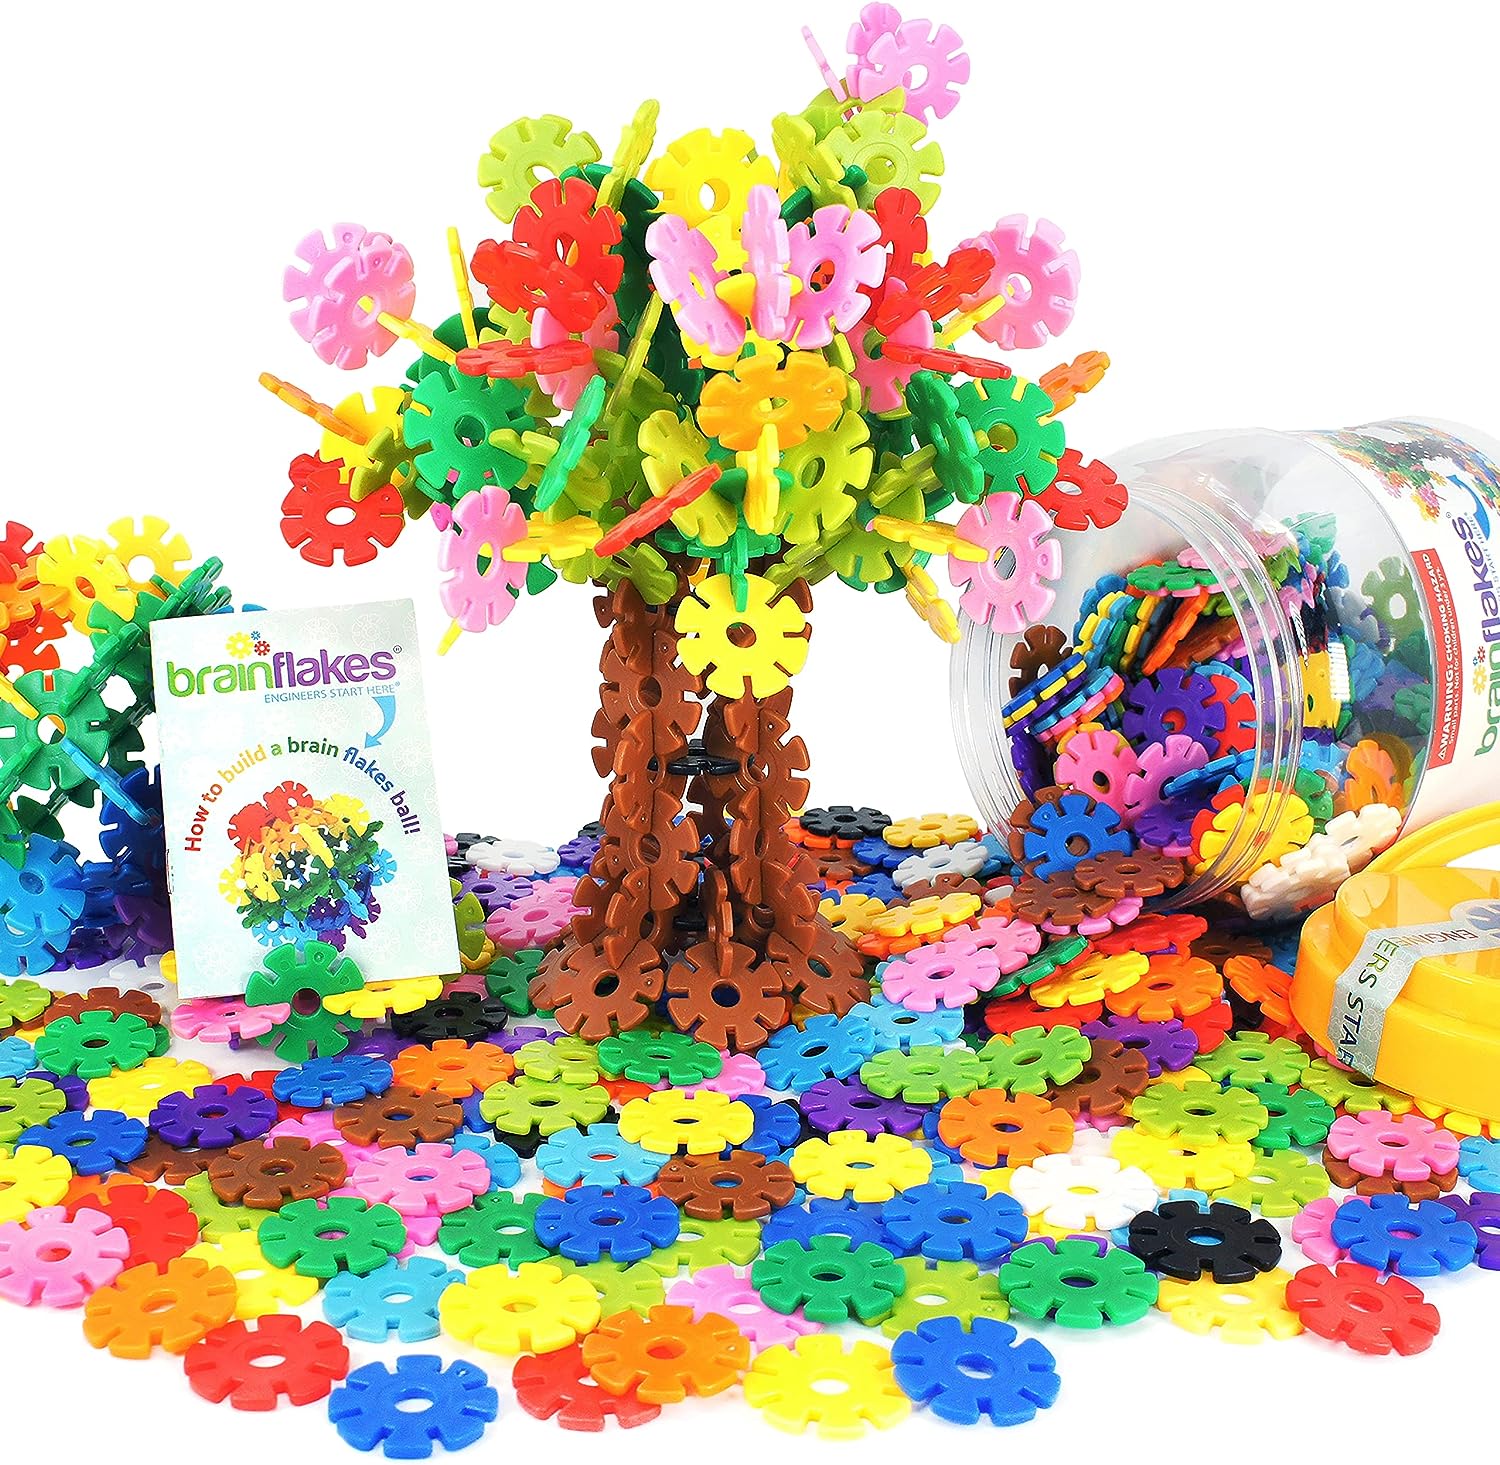 VIAHART Brain Flakes 500 Piece Interlocking Plastic Disc Set - A Creative and Educational Alternative to Building Blocks - Tested for Childrens Safety - A Great Stem Toy for Both Boys and Girls : Toys Games